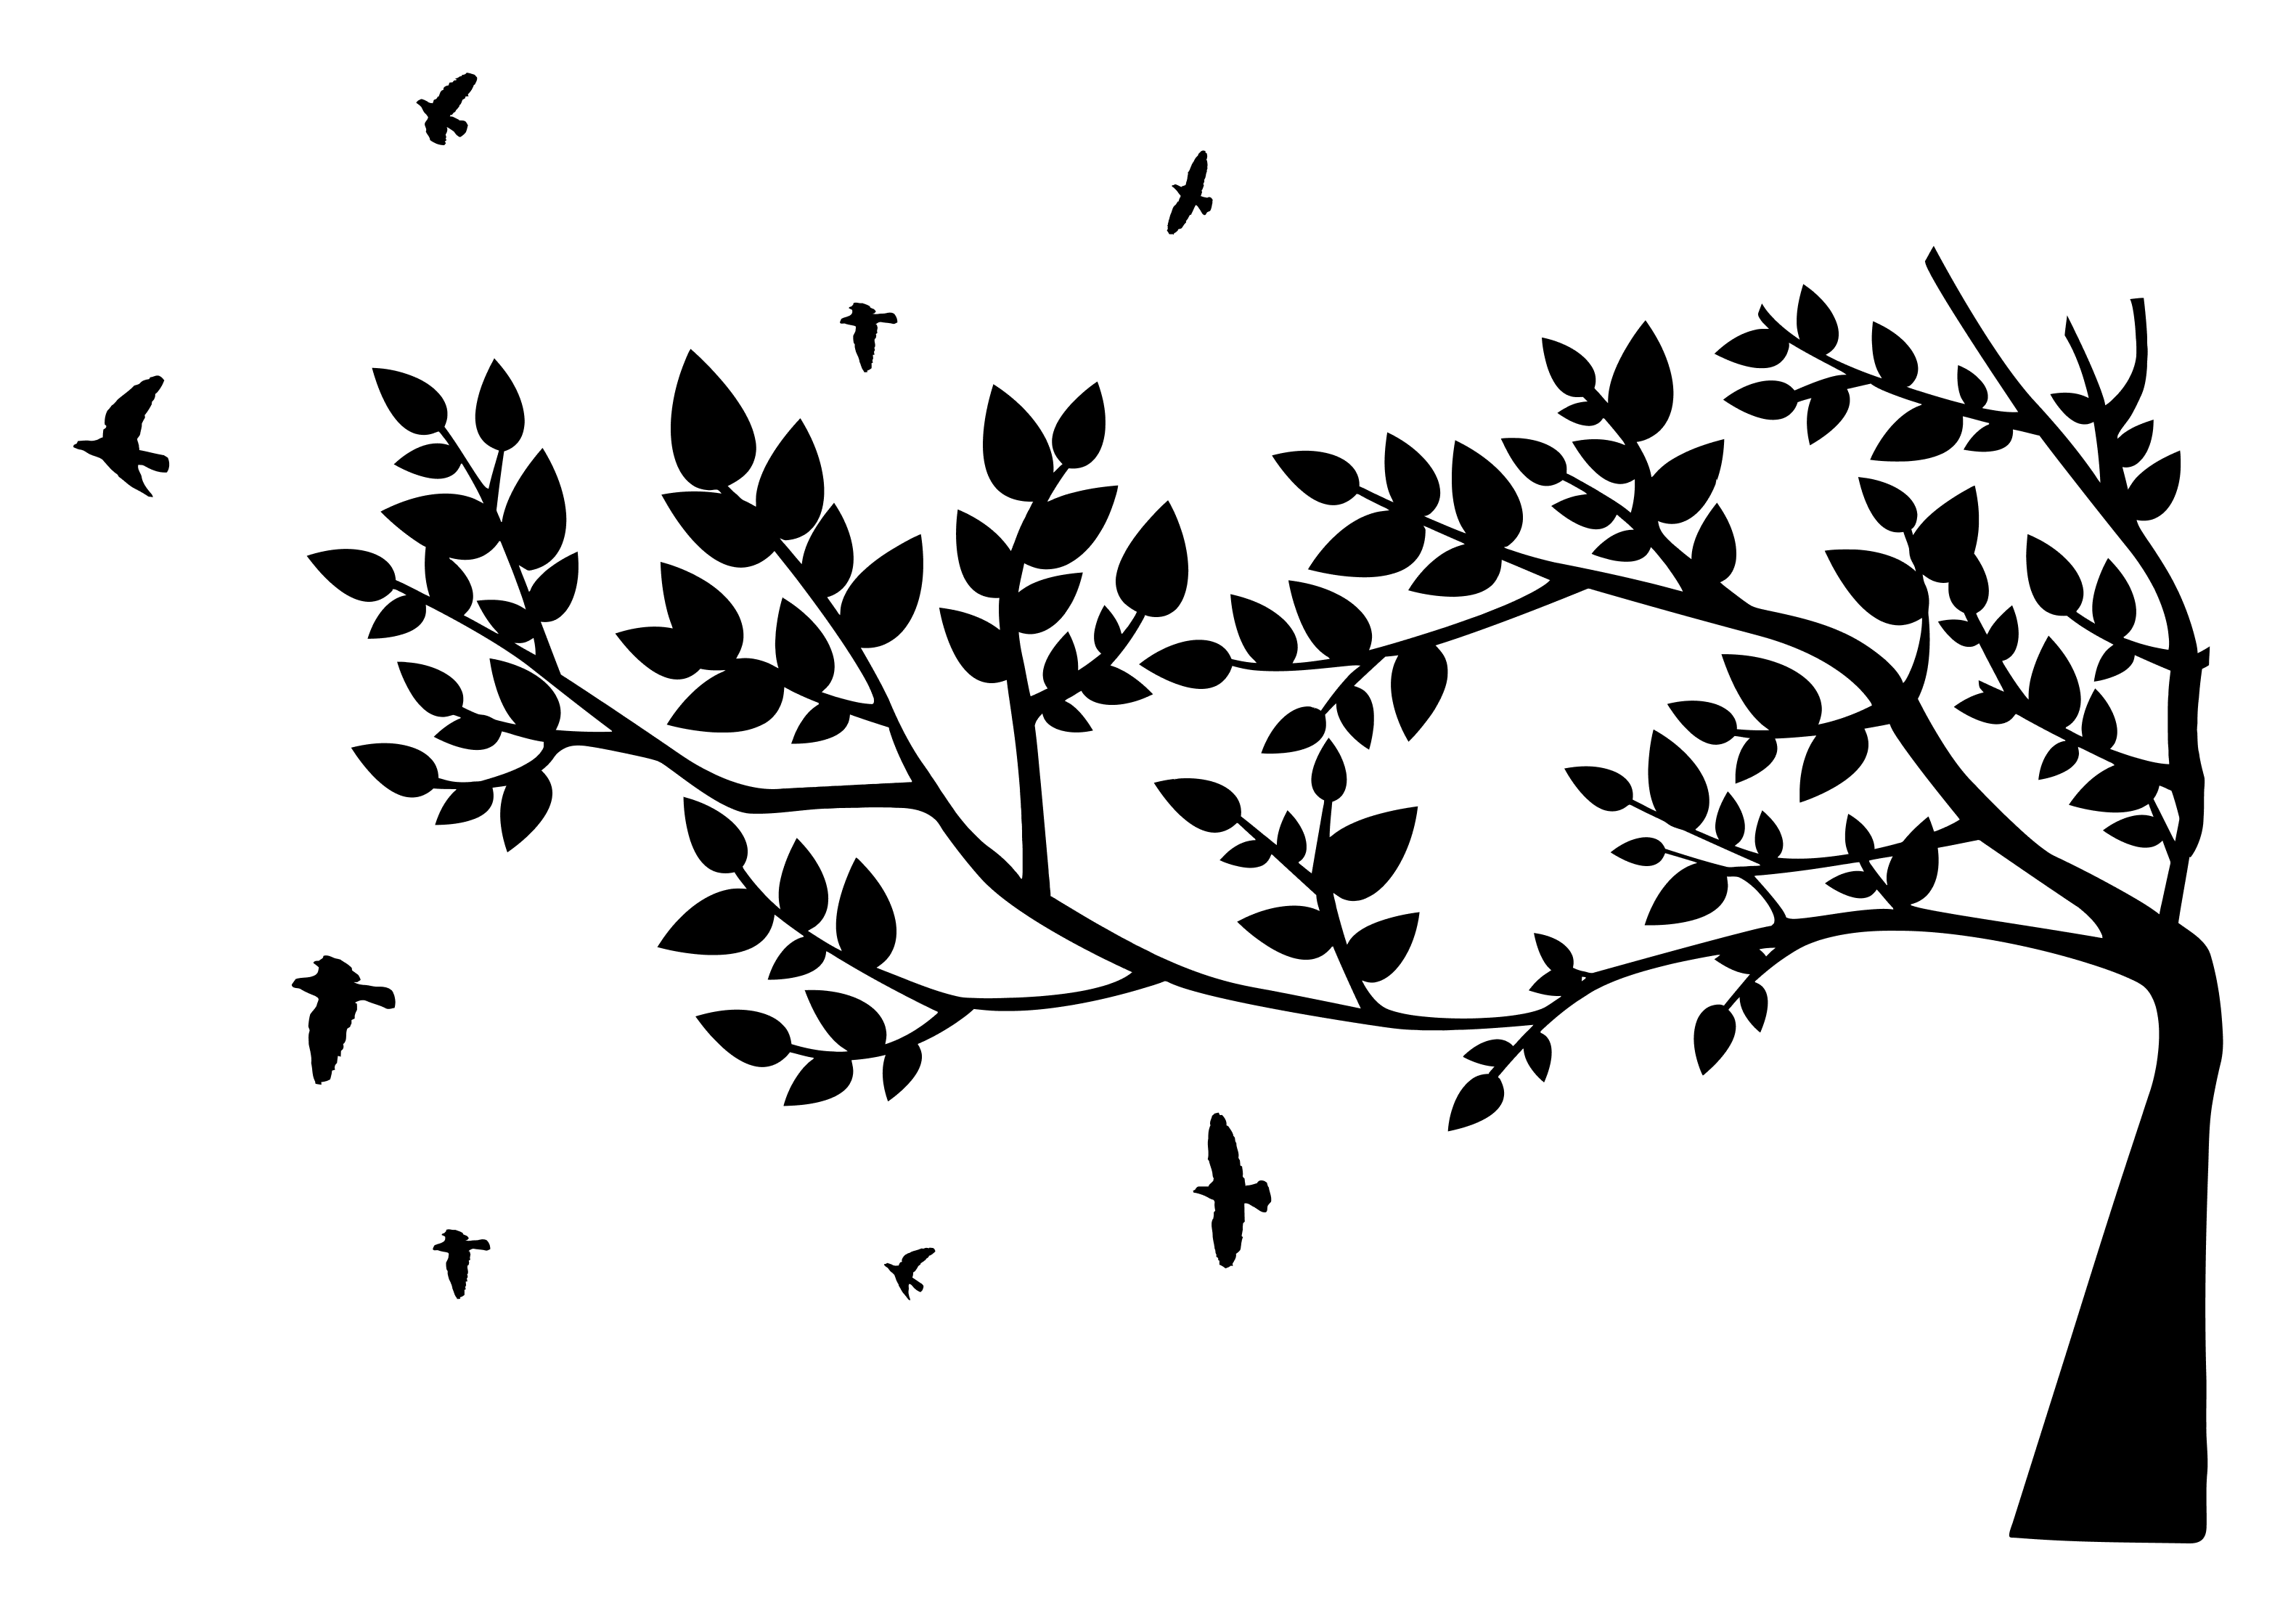 Illustration of a peaceful tree, leaning to the left, with birds flying away